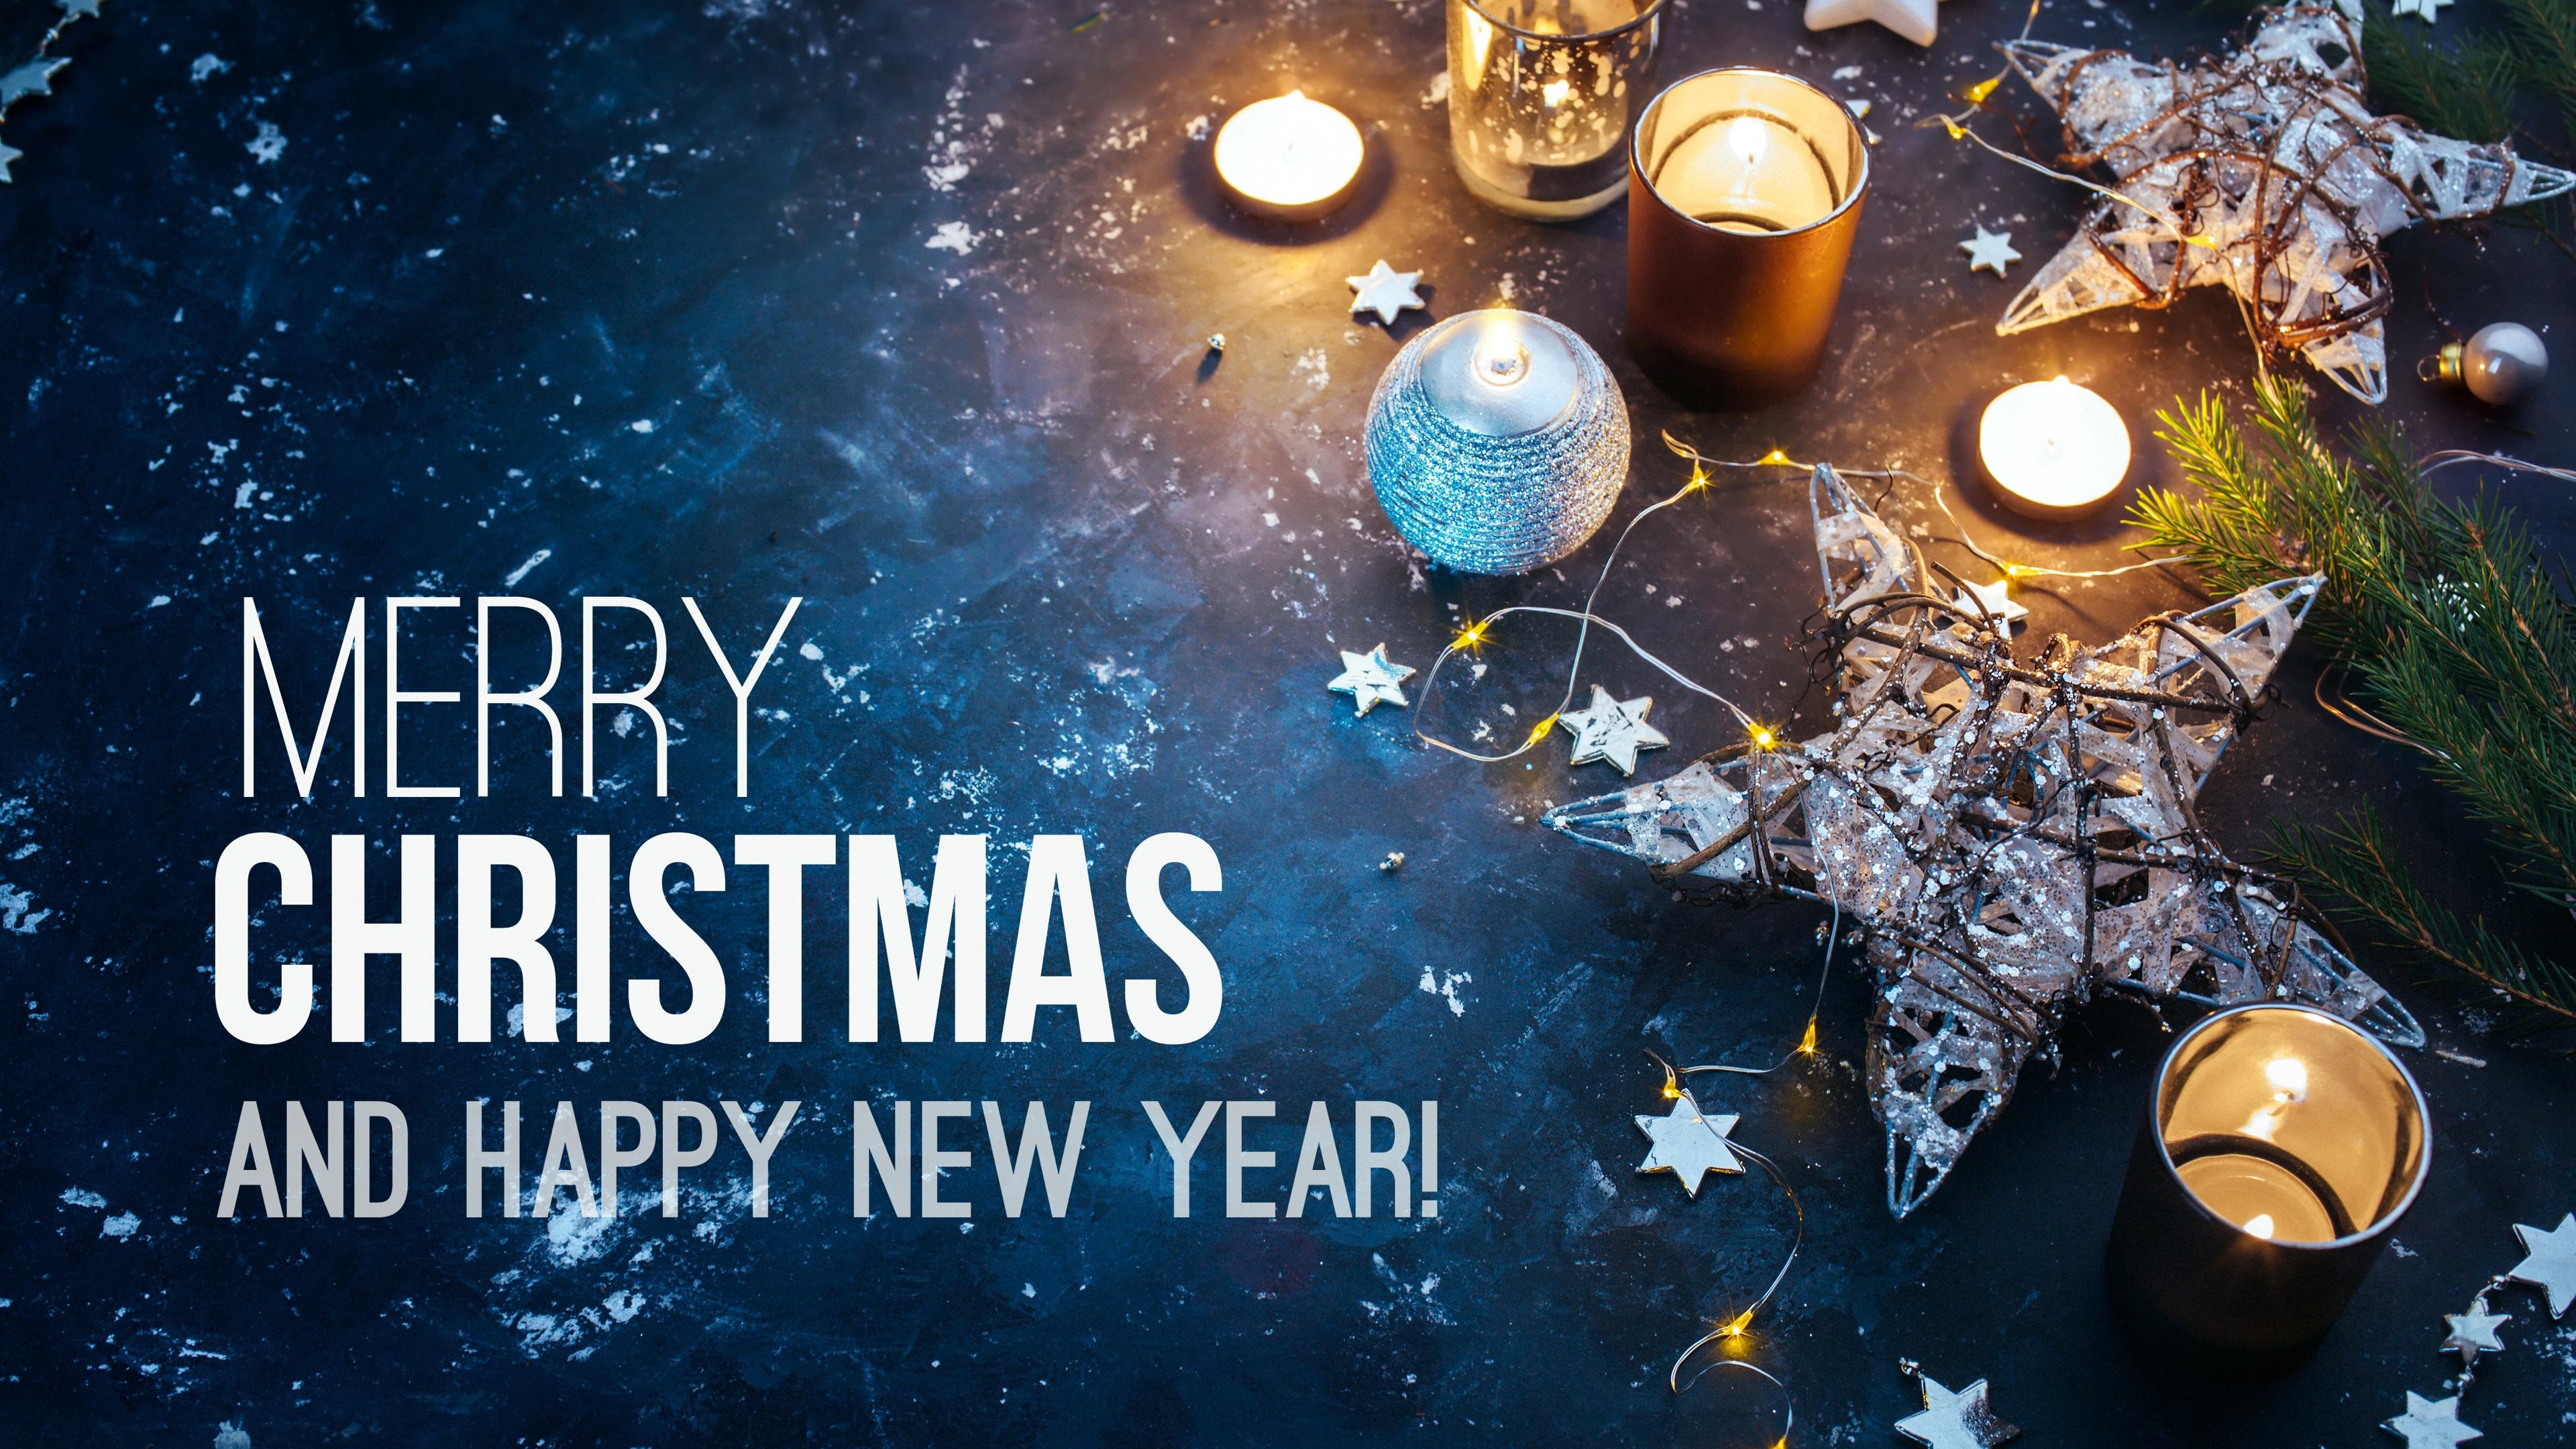 Wallpaper Merry Christmas and Happy New Year, candles, stars 3840x2160 UHD 4K Picture, Image